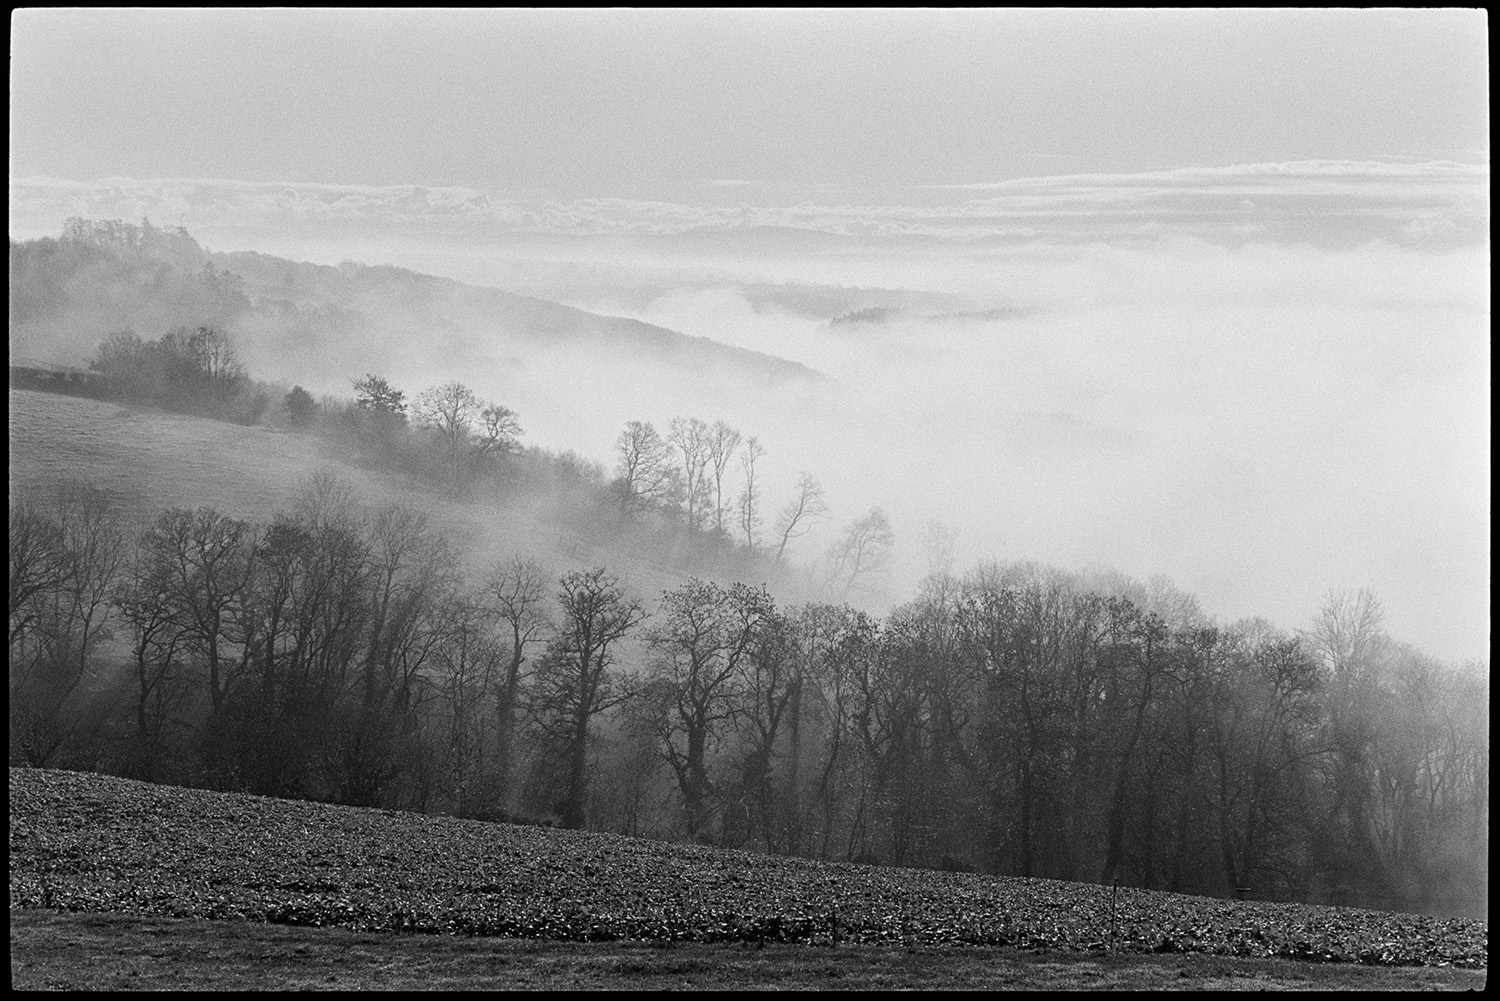 Misty early morning with cows, sunrise over woods with distant moor. 
[Fields, trees, clouds and woodland in a misty landscape at Harepath, Beaford, in the morning. Dartmoor can just be seen on the horizon.]